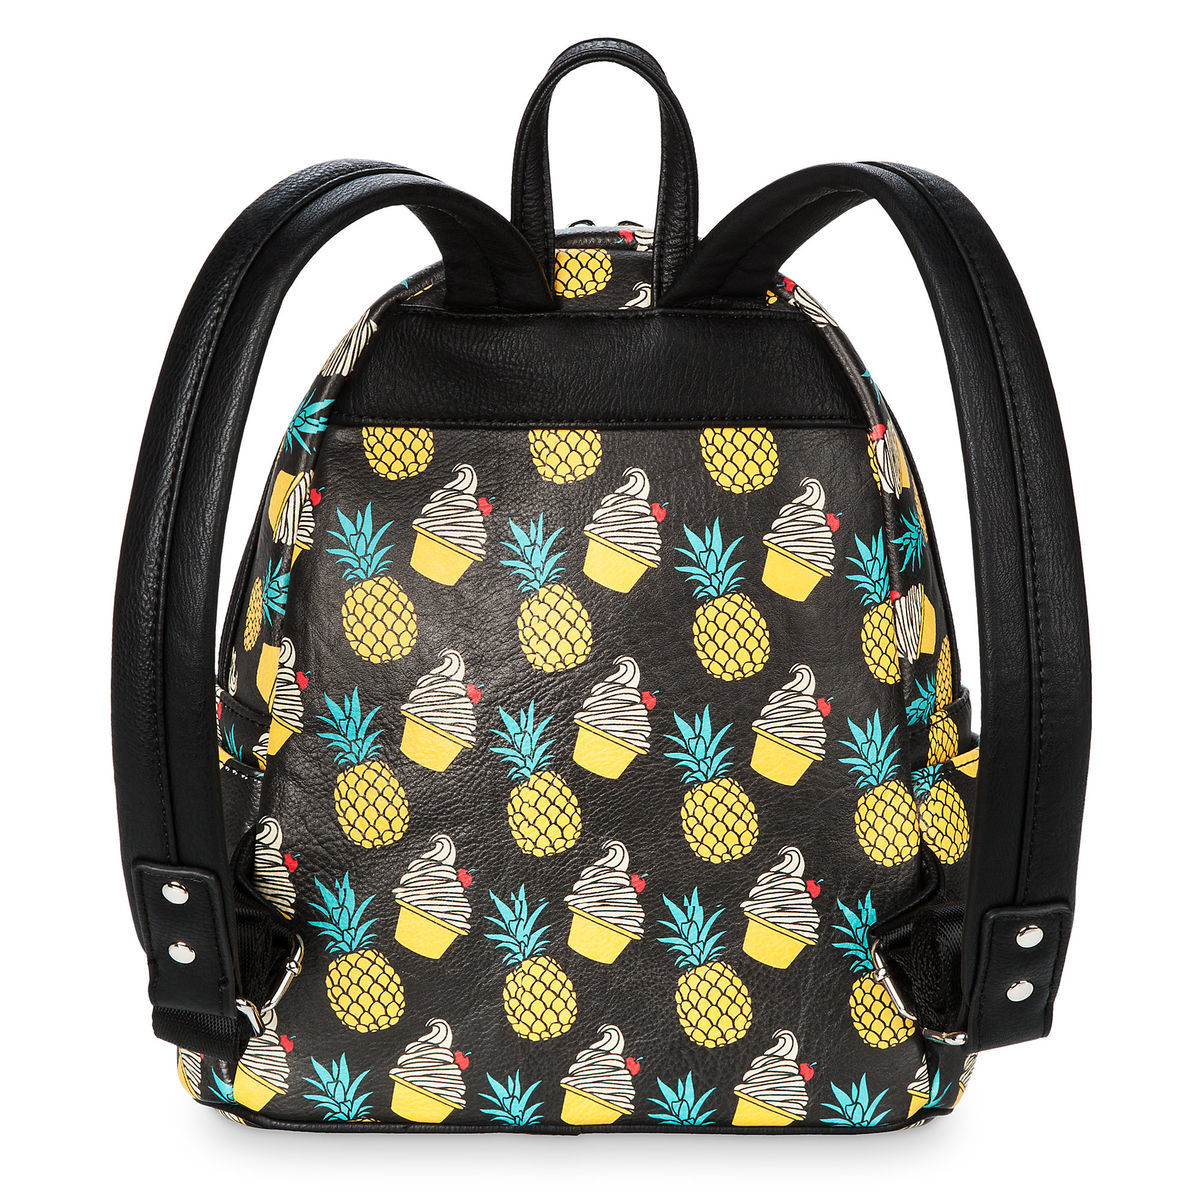 Disney Pineapple Swirl Mini Backpack by Loungefly New with Tags